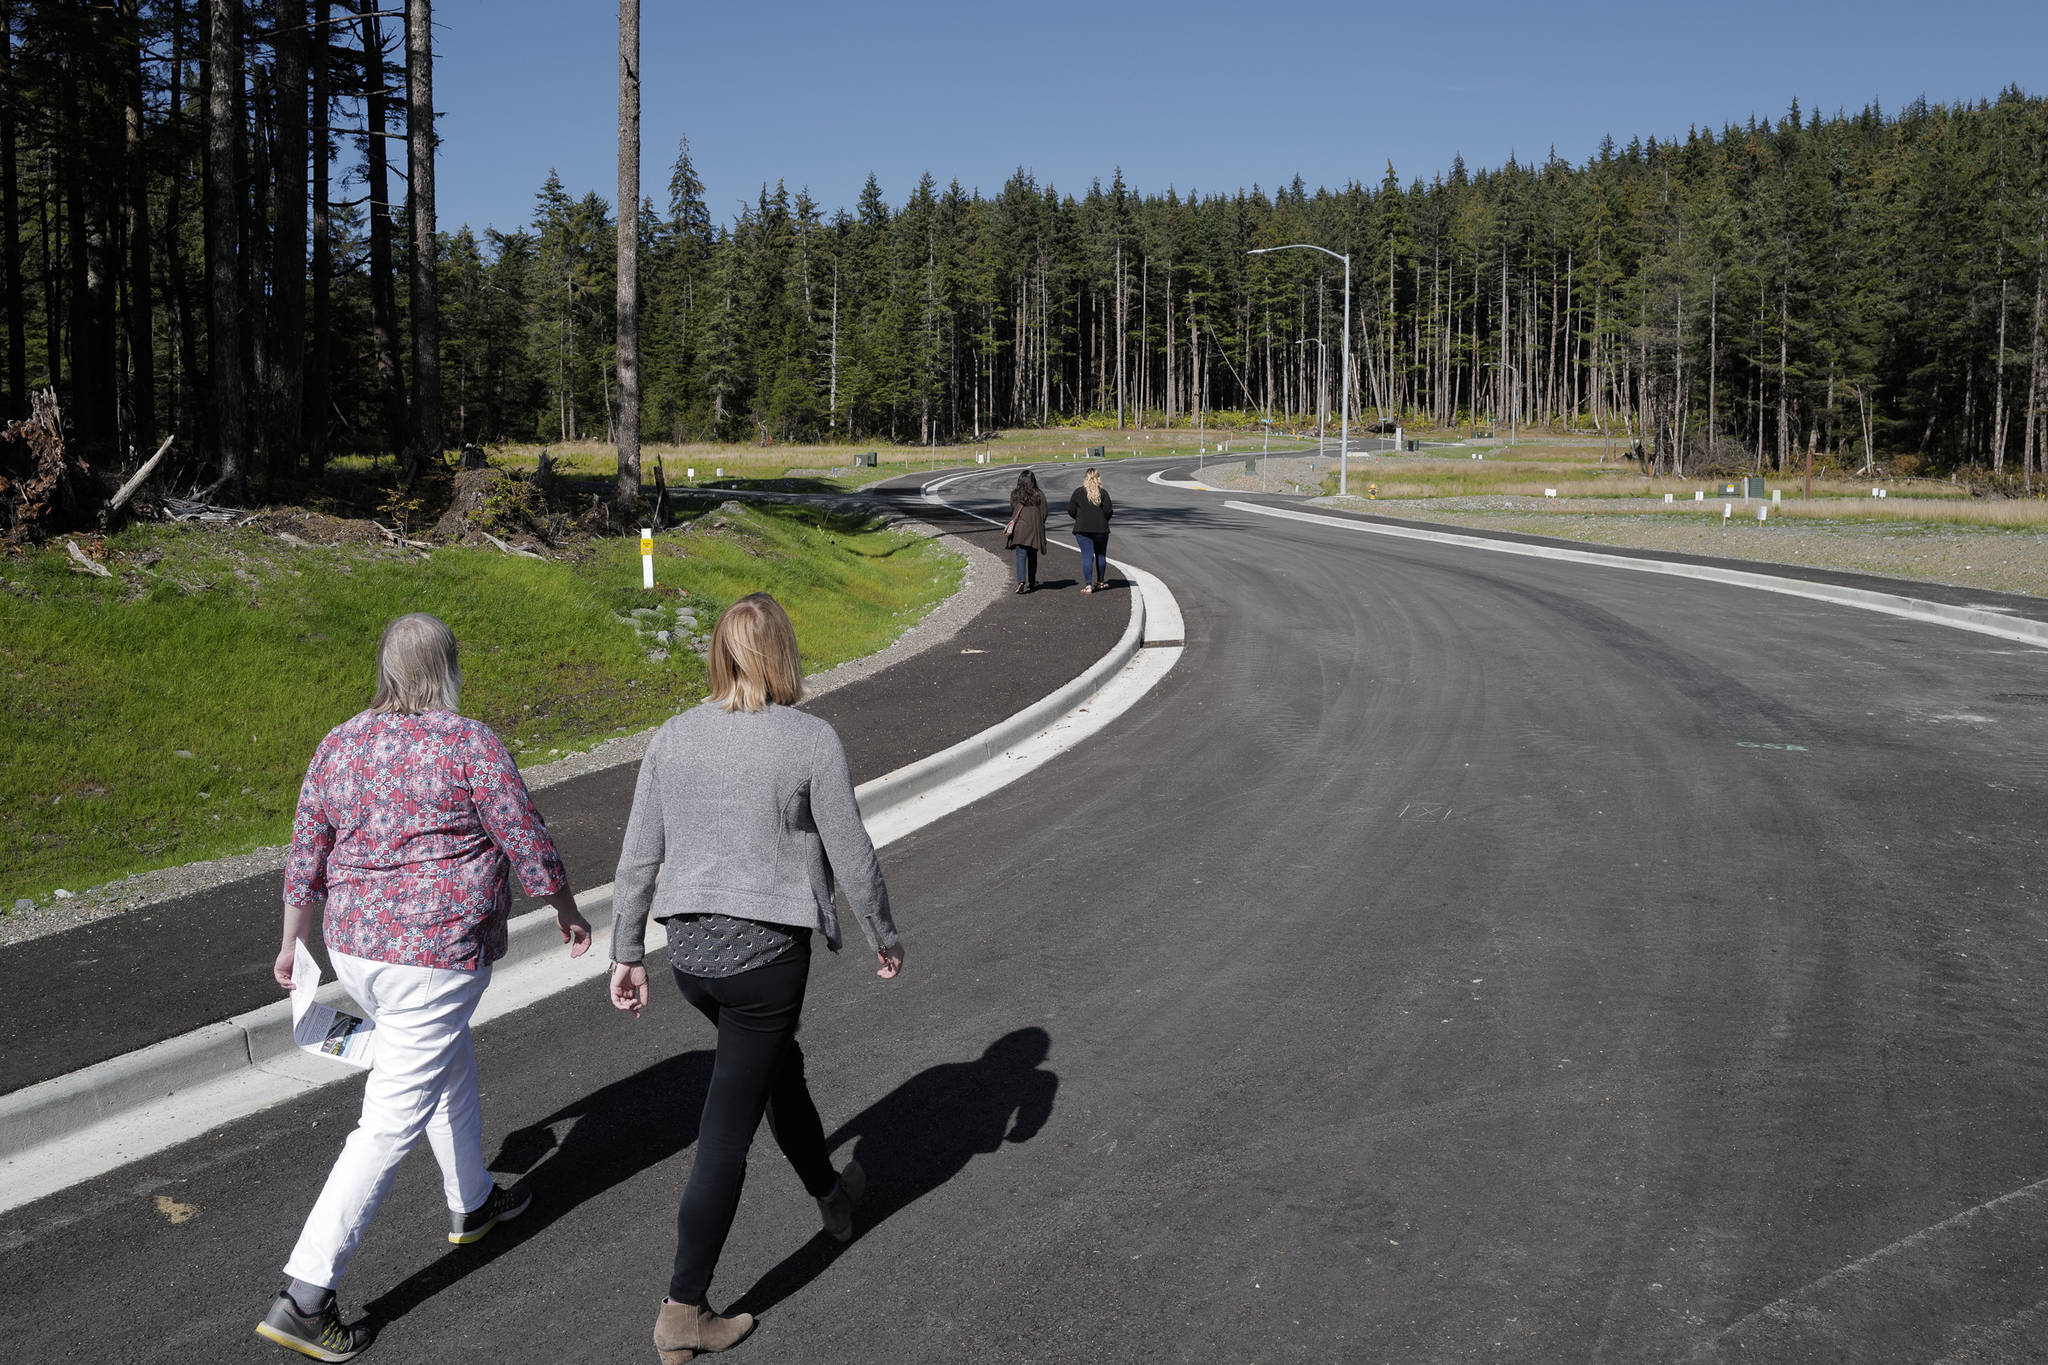 Mayor Beth Weldon and Assembly Member Carole Triem take a stroll on Karl Reishus Boulevard after a ribbon-cutting ceremony to commemorate the near completion of the Pederson Hill Subdivision on Friday, Sept. 6, 2019. Reishus was a Juneau Police Department officer who died in 1992 when he fell from a 40-foot tower during a training exercise. (Michael Penn | Juneau Empire)